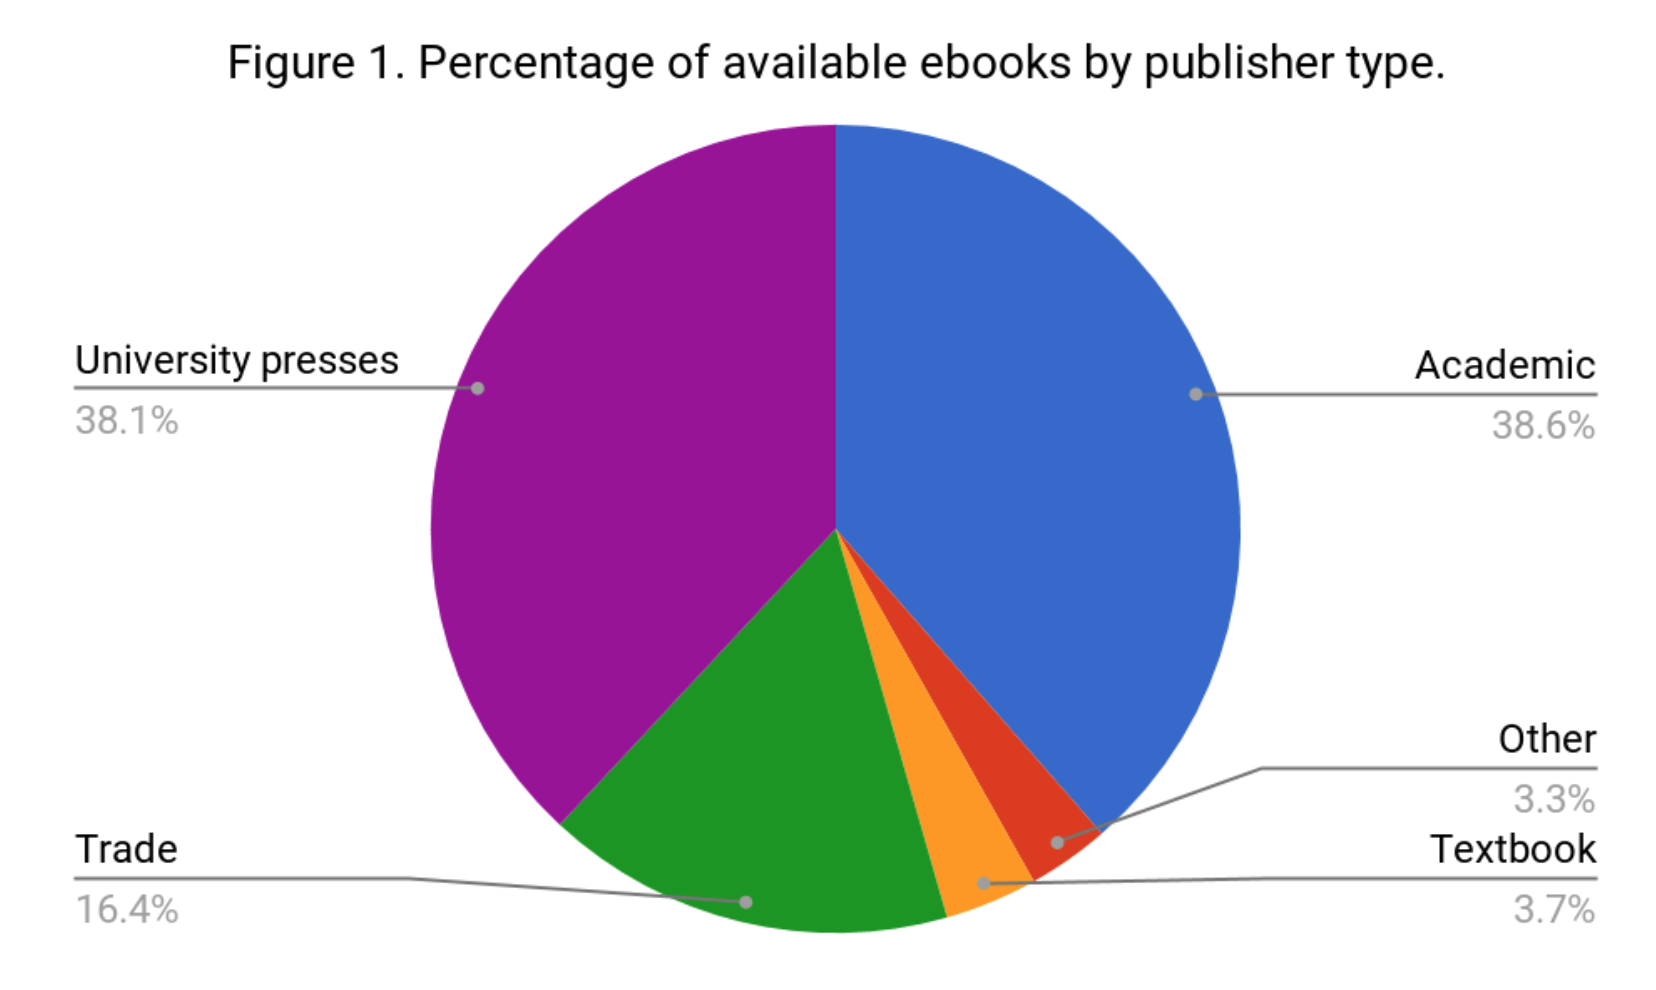 Percentage of available ebooks by publisher type